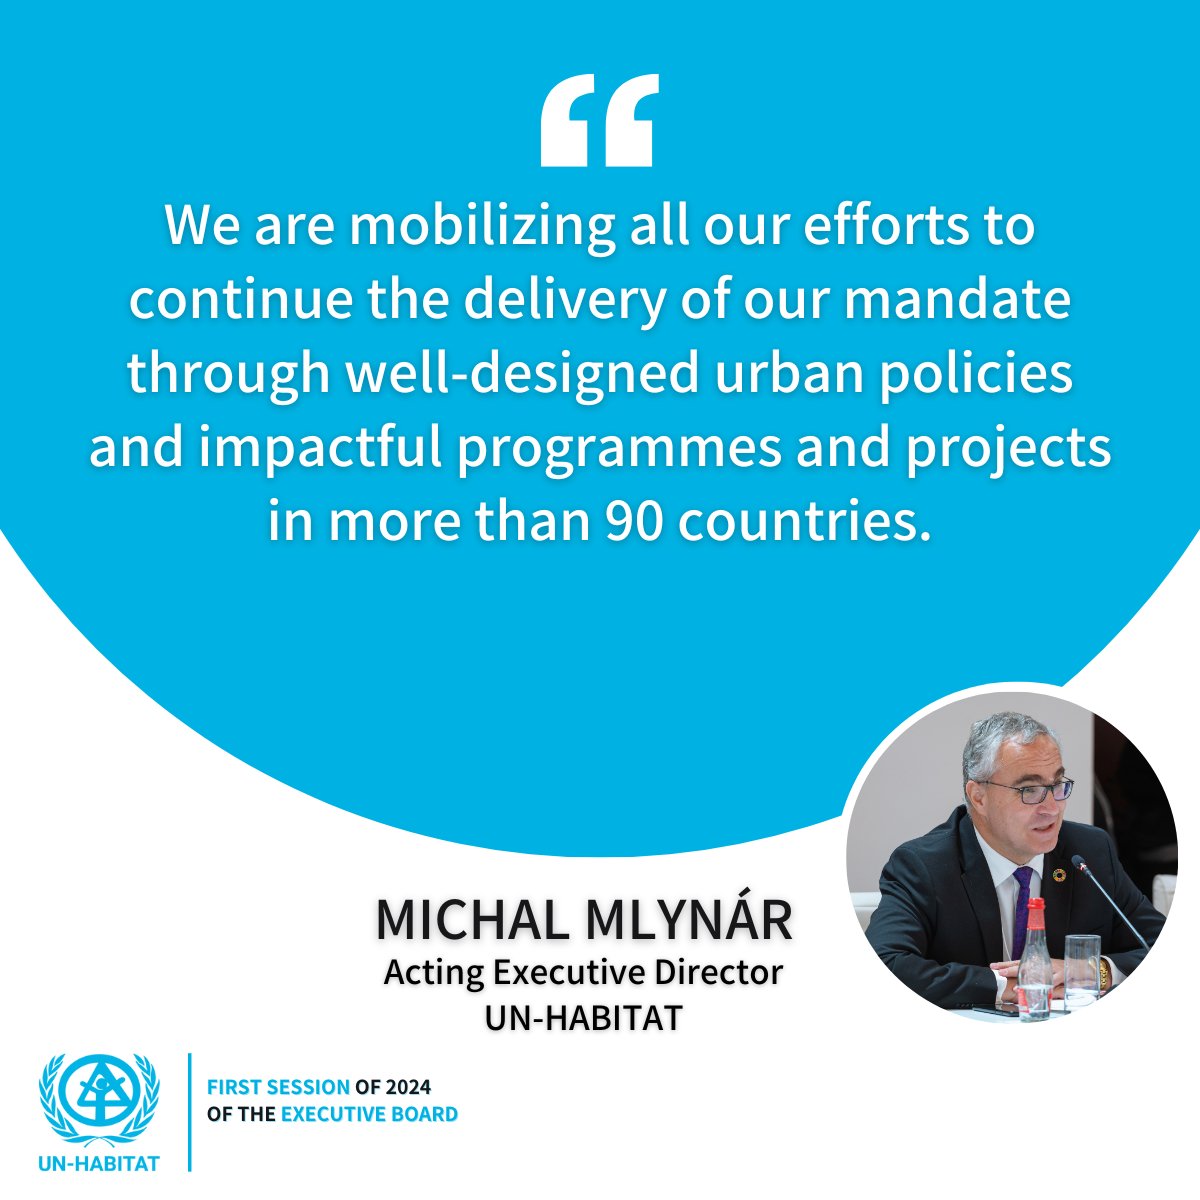 'We are mobilizing all our efforts to continue the delivery of our mandate through well-designed urban policies and impactful programmes and projects in more than 90 countries.' -Acting Executive Director @MichalMlynar at the first session of 2024 of the Executive Board.